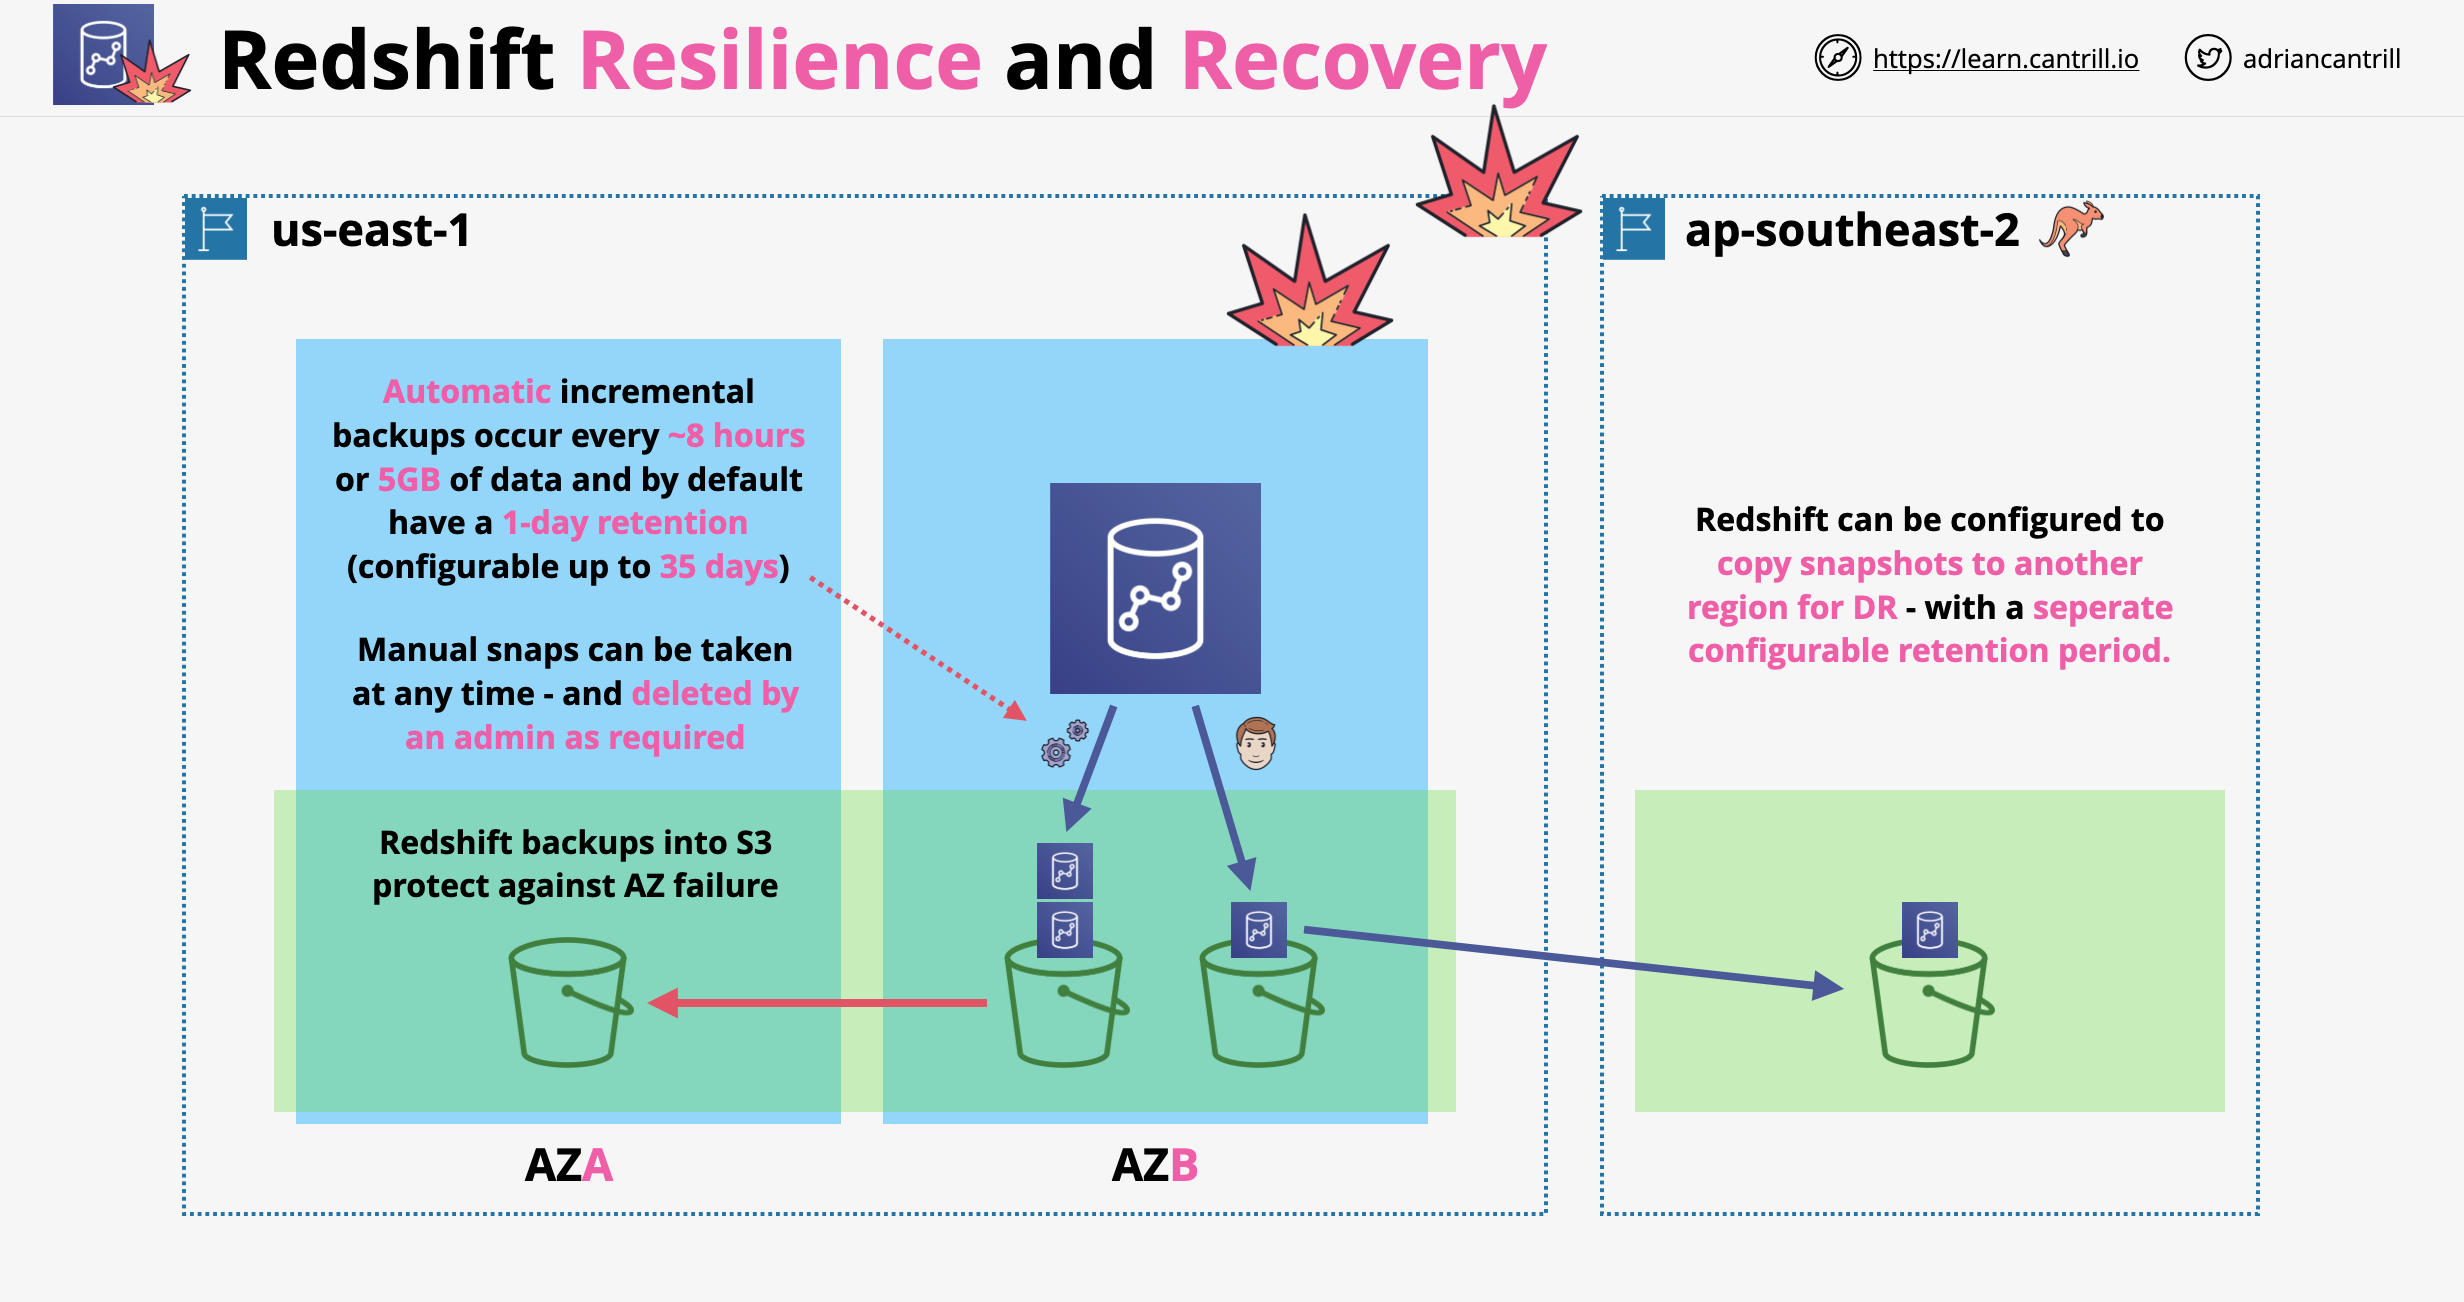 Redshift Resilience and Recovery